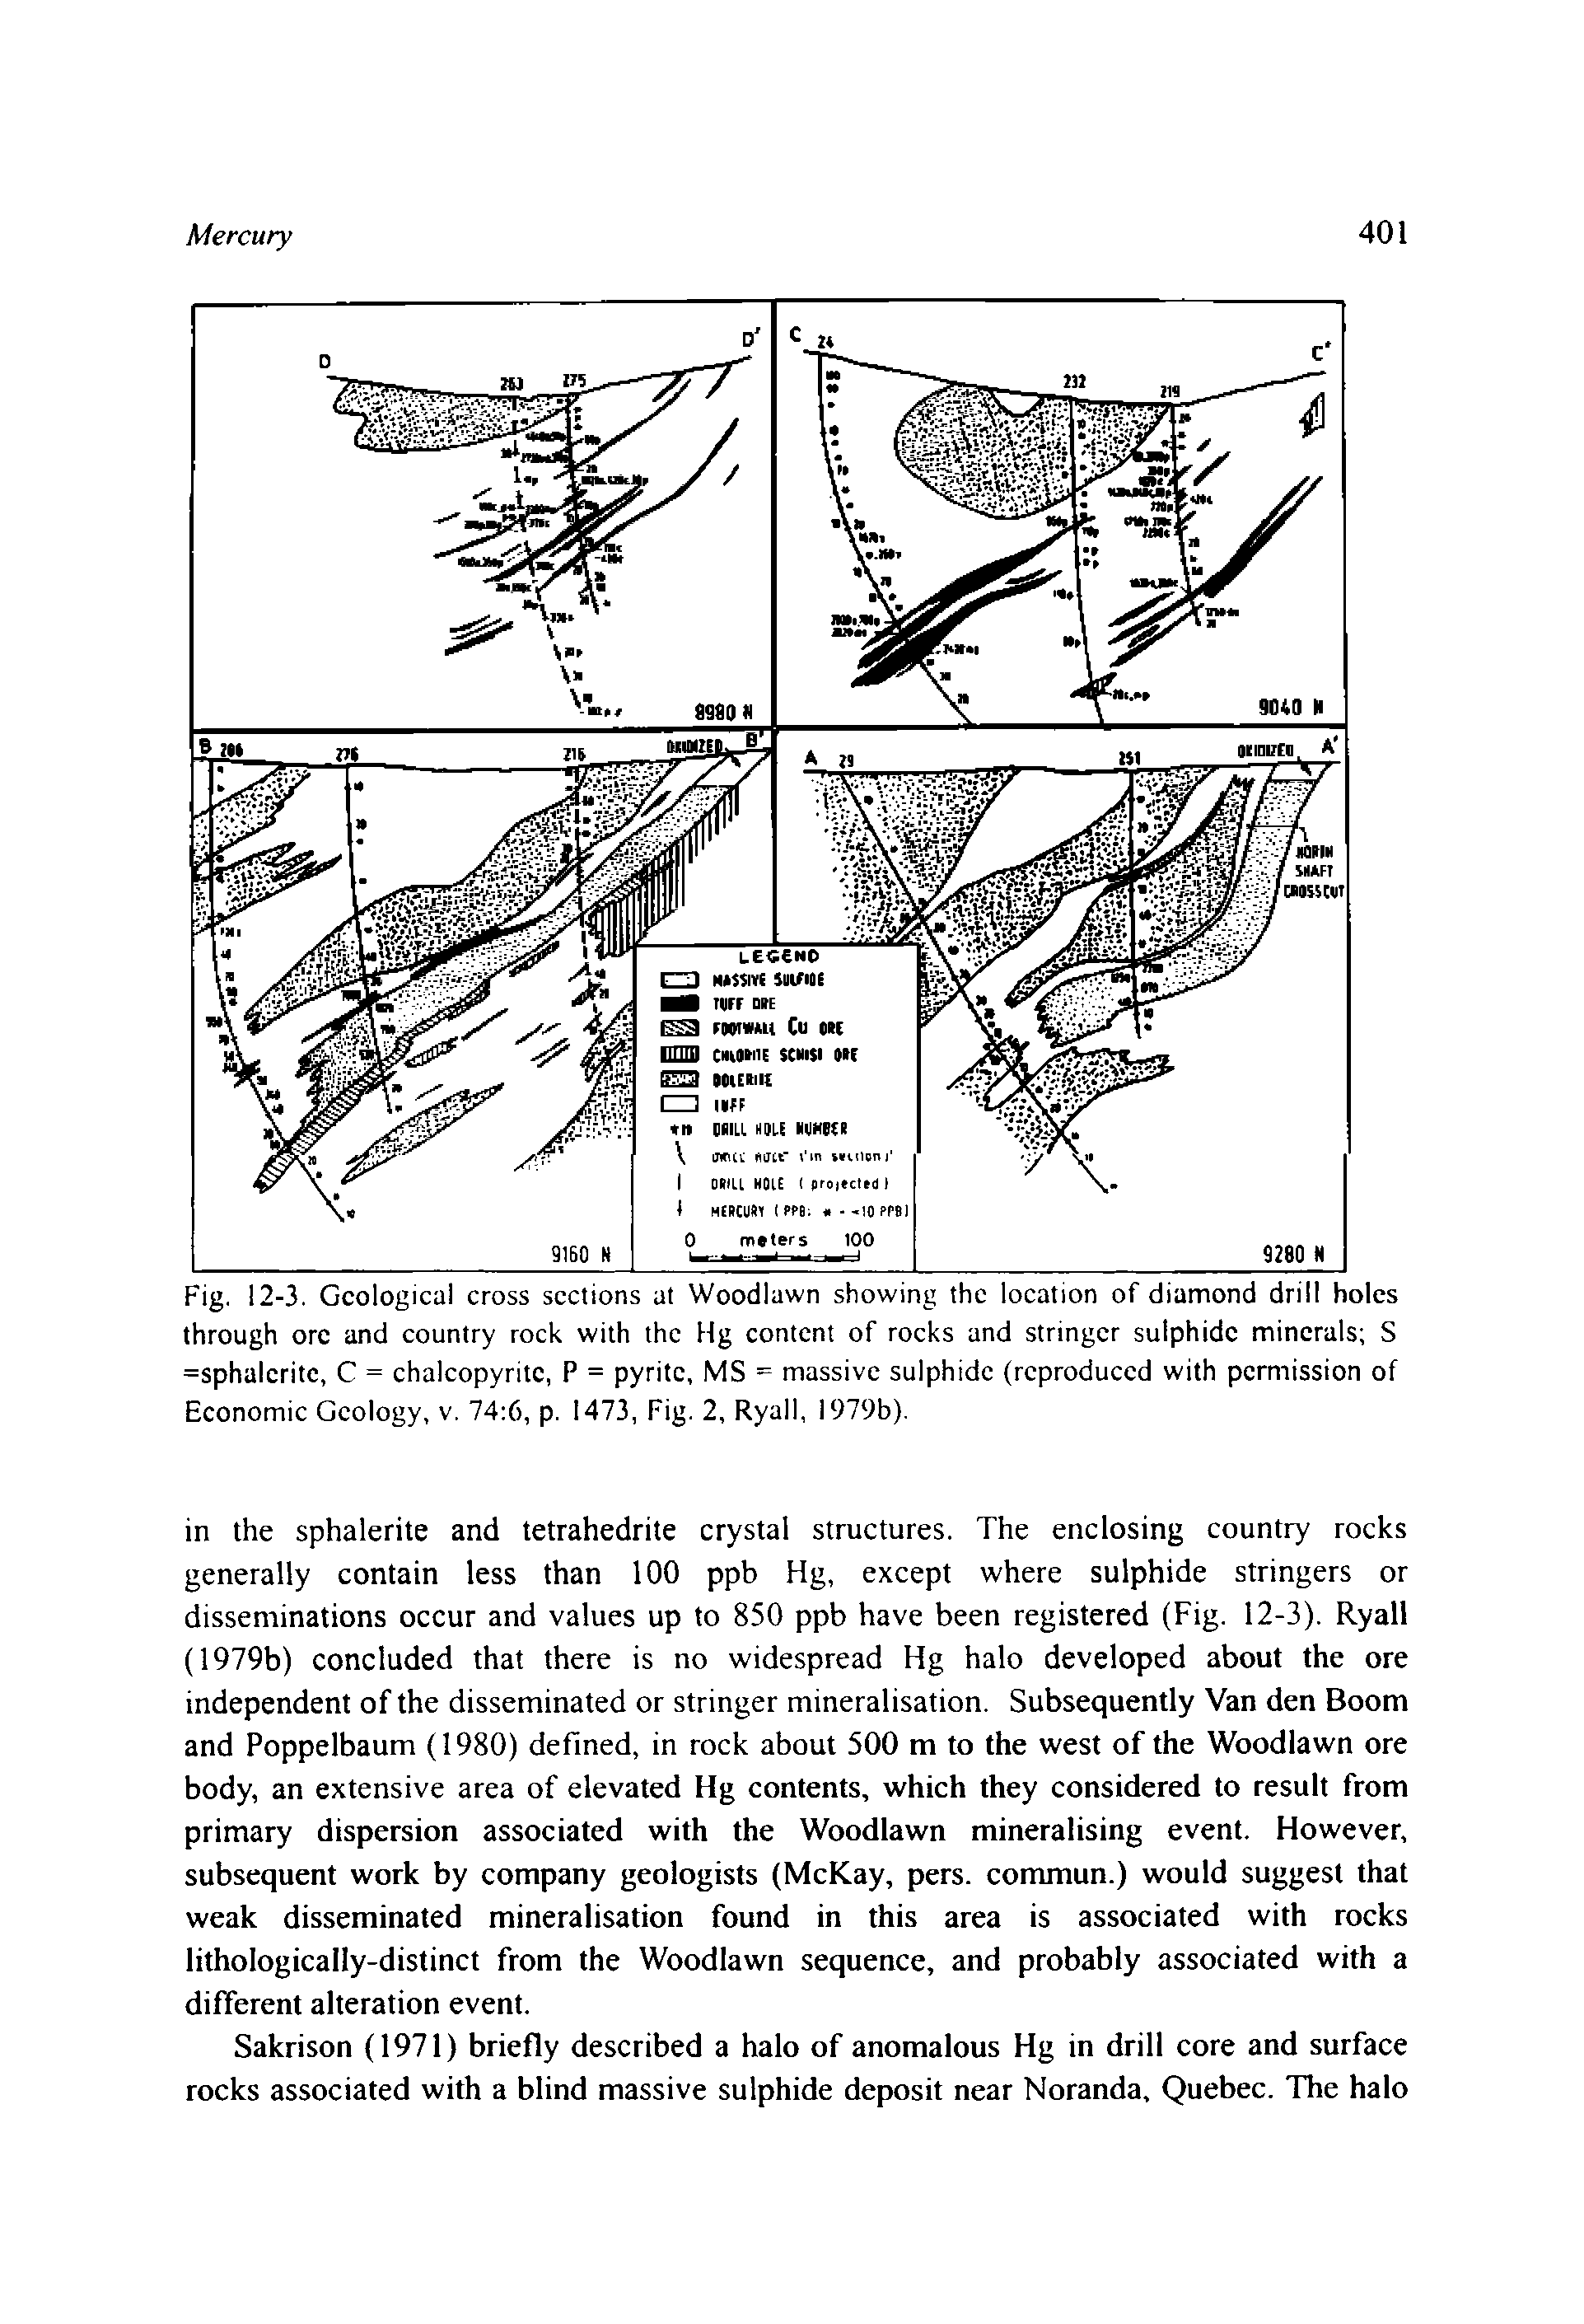 Fig. 12-3. Geological cross sections at Woodlawn showing the location of diamond drill holes through ore and country rock with the Hg content of rocks and stringer sulphide minerals S =sphalcritc, C = chalcopyritc, P = pyritc, MS = massive sulphide (reproduced with permission of Economic Geology, v. 74 6, p. 1473, Fig. 2, Ryall, 1979b).